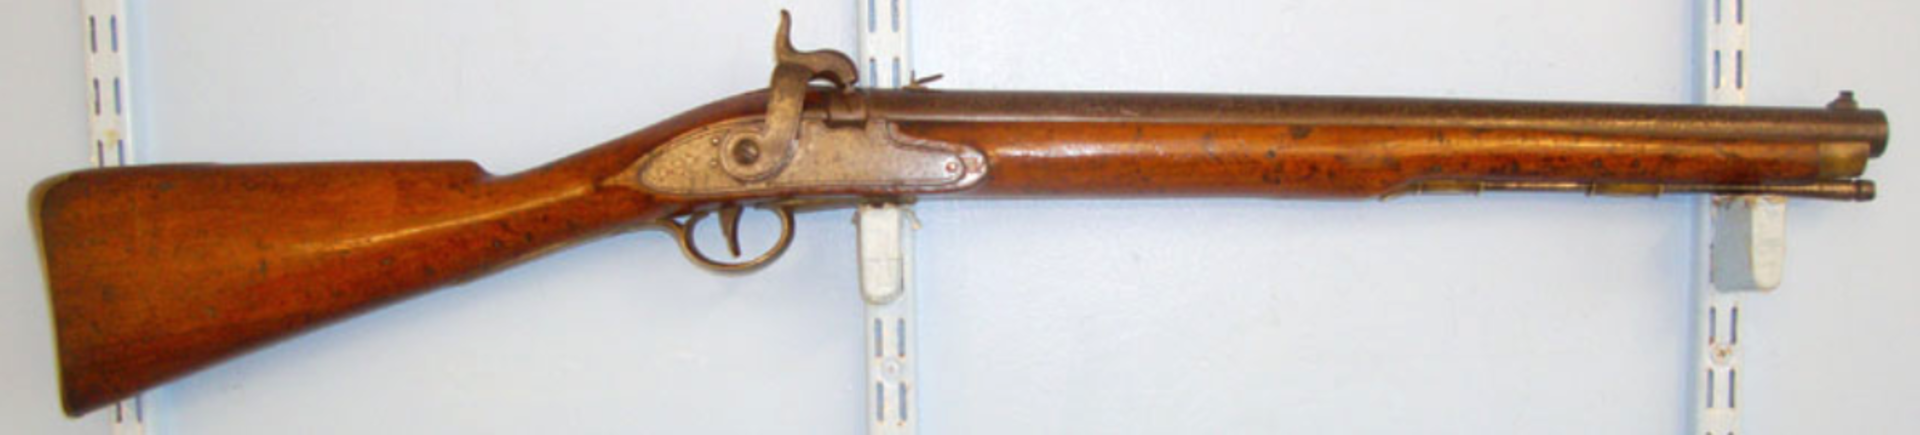 C1850 Victorian British Officer's Private Purchase Percussion Rifled 13 Bore Fusil Musket Saddle